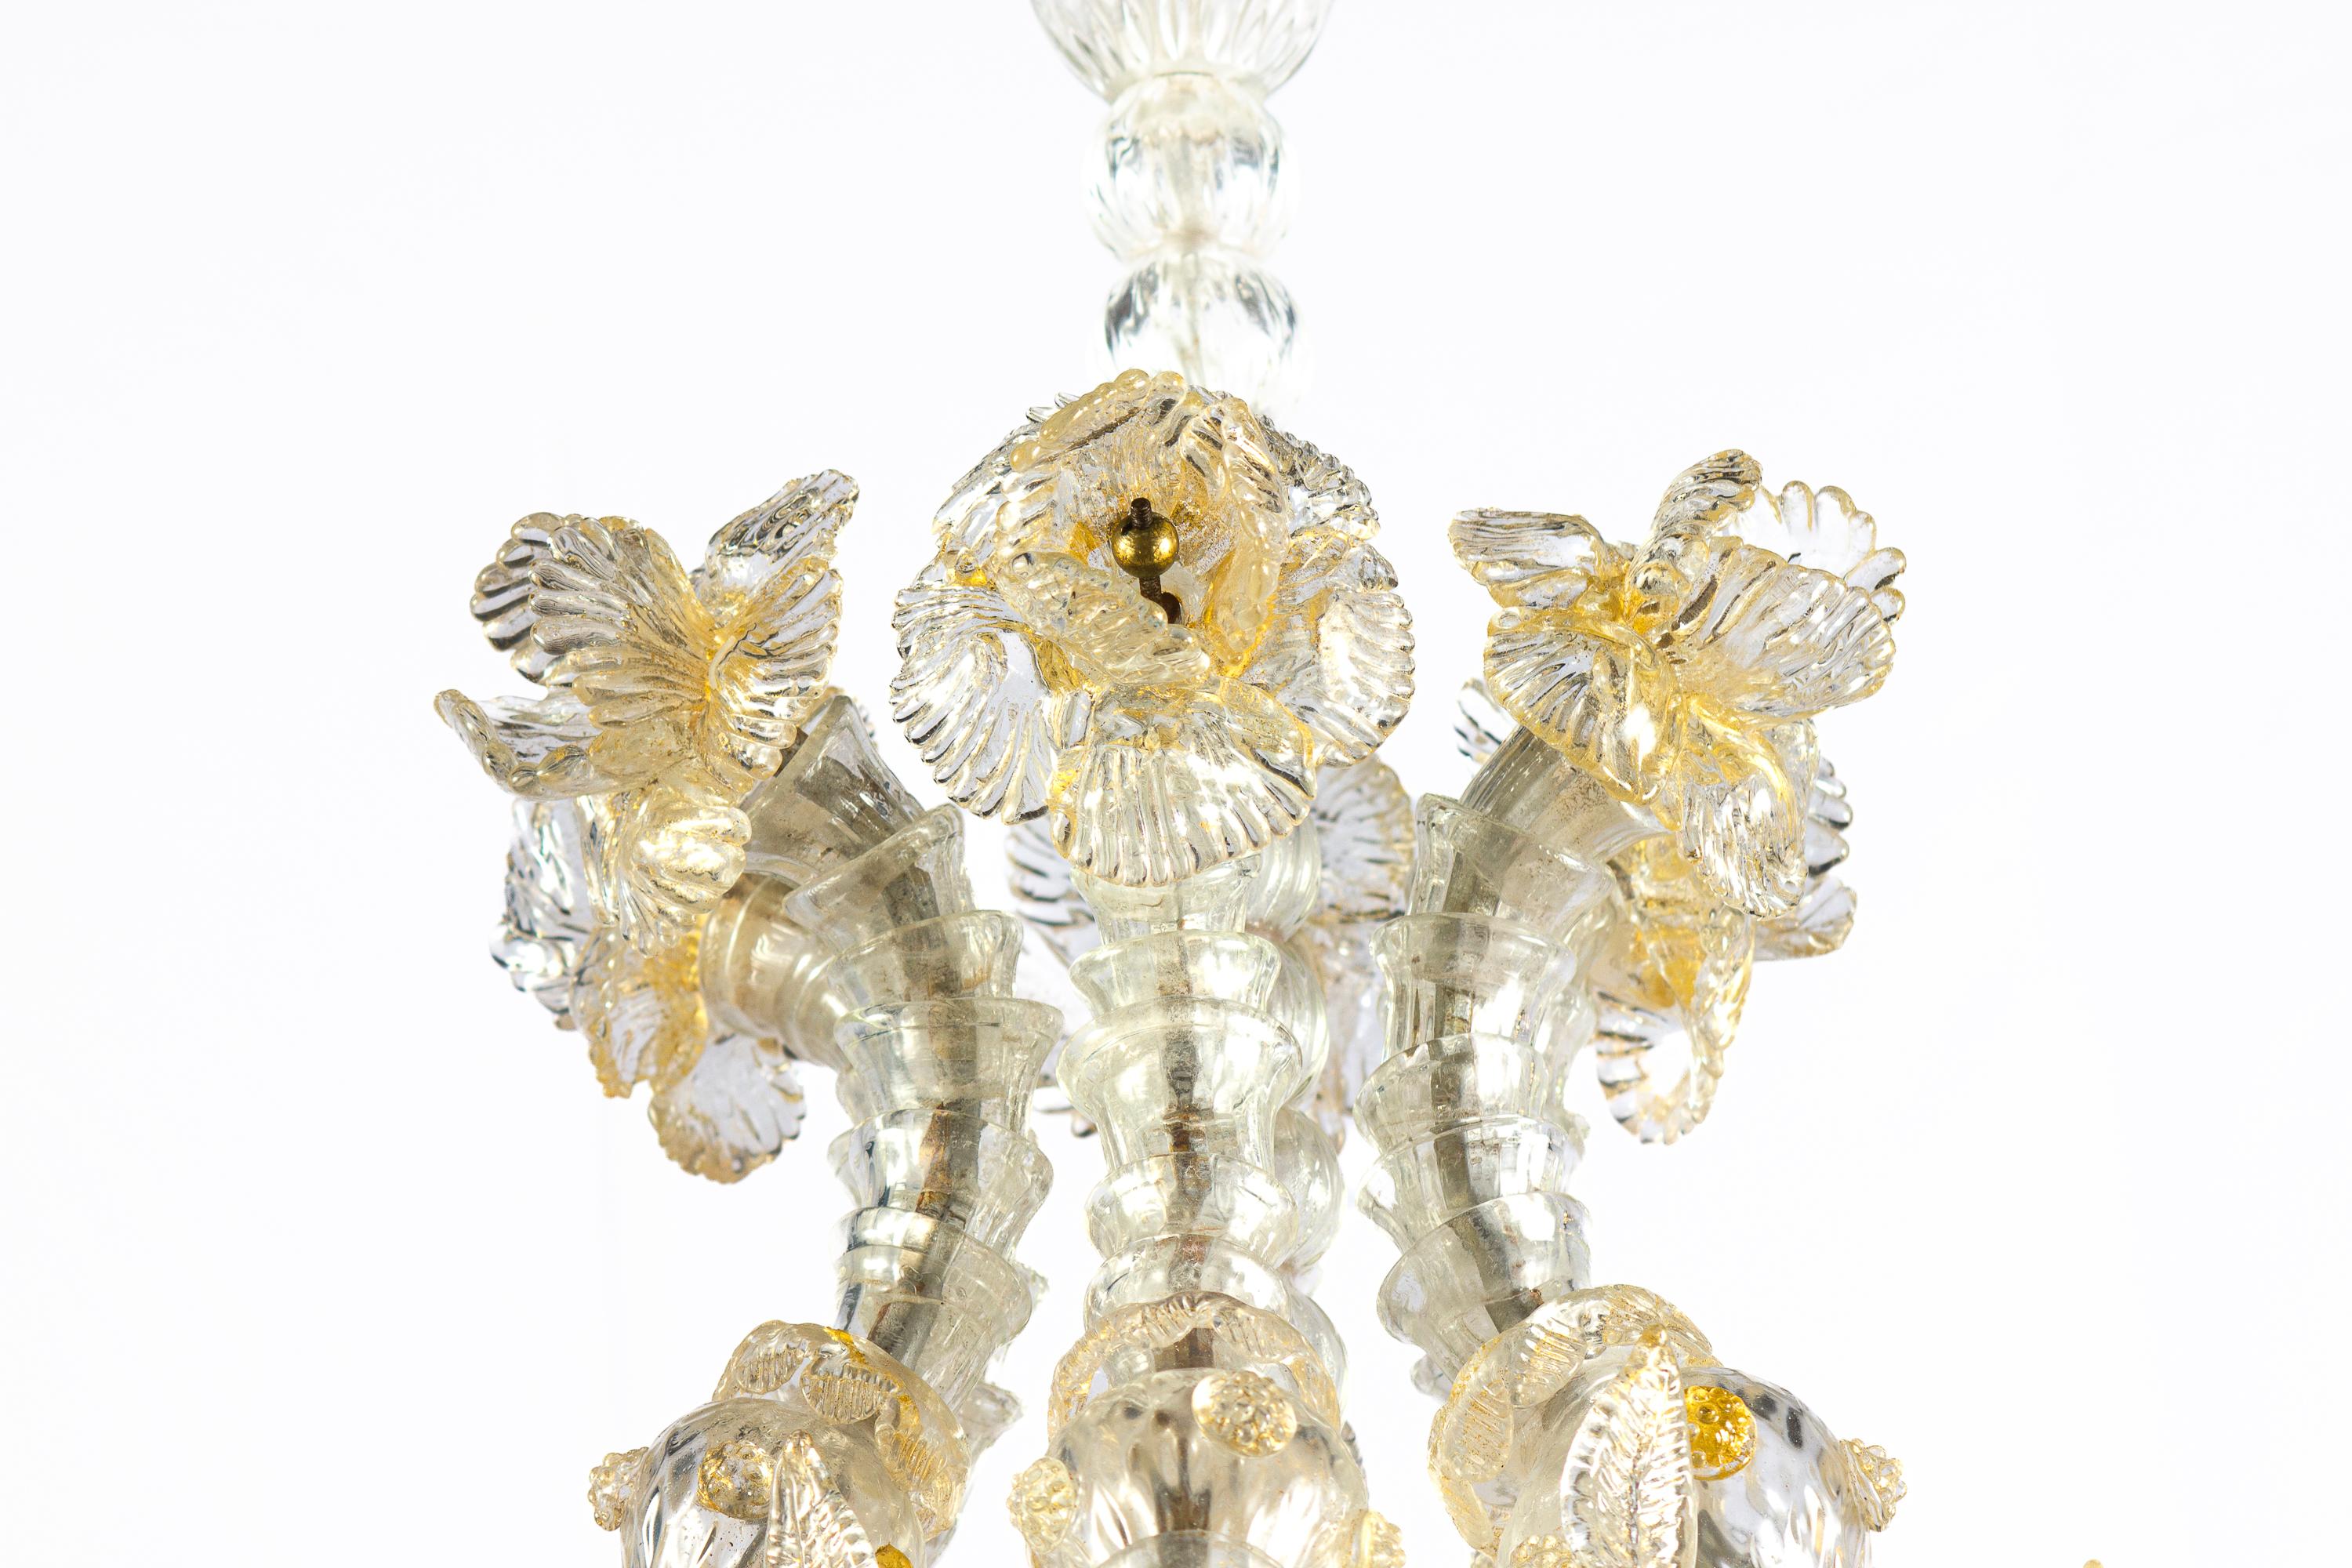 Italian Overwhelming Murano Glass Lantern or Chandelier by Barovier & Toso, 1940' For Sale